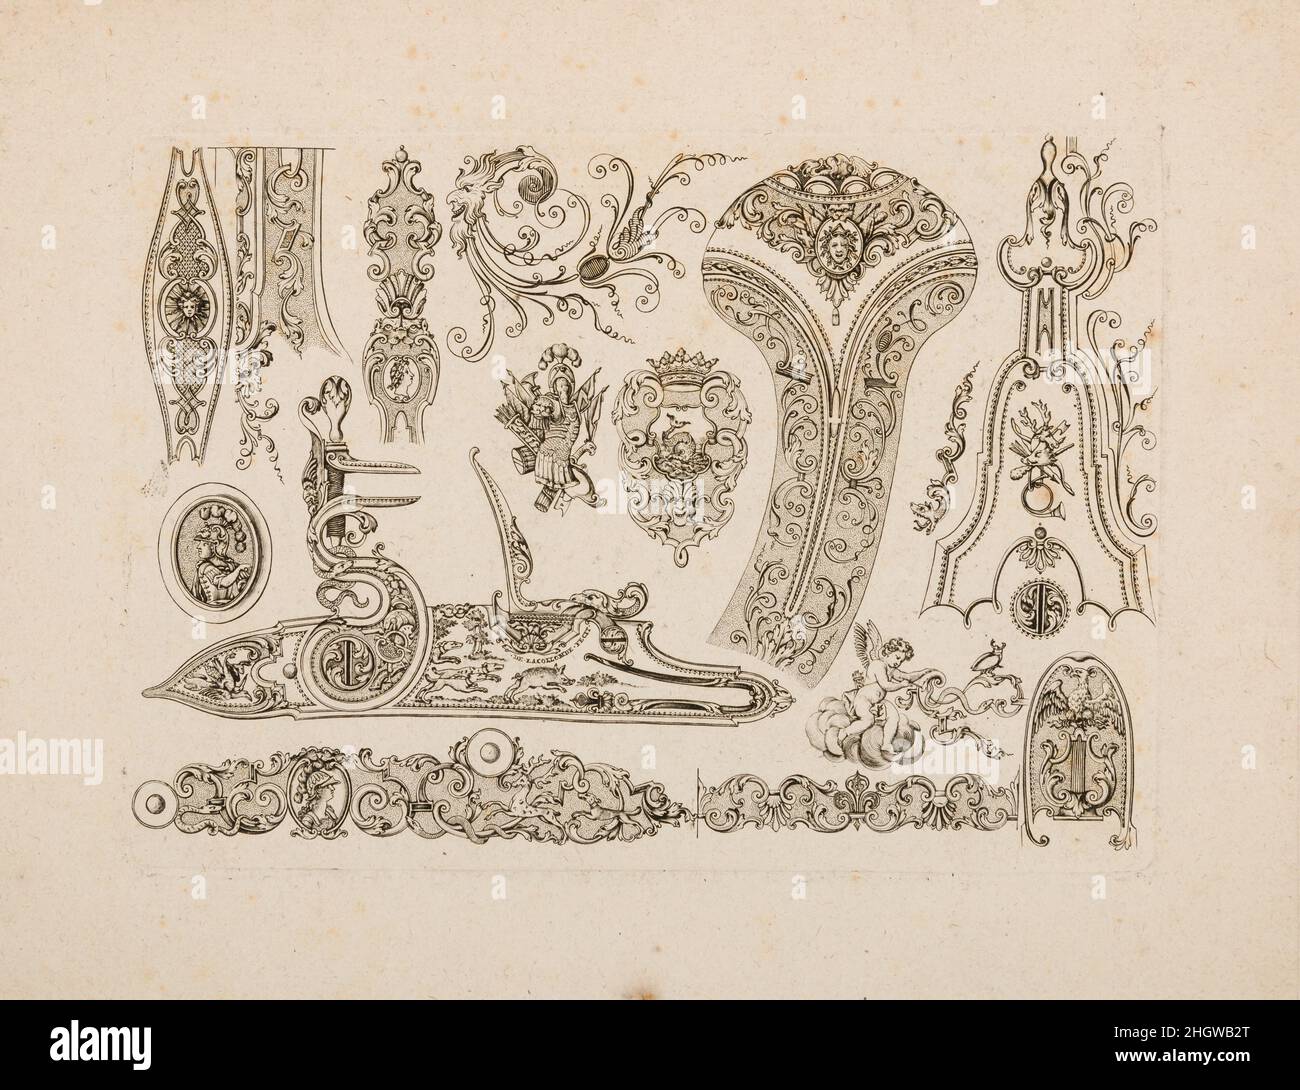 Plate Four from Nouveavx Desseins D'Arquebvseries ca. 1730 De Lacollombe This print is a prime example of French designs for the decoration of firearms in the late rococo style, which set the fashion for luxury arms across Europe at the time. It was created by an enigmatic engraver known only as De Lacollombe and comes from a series of prints that was added to after his death and then published by his better-known pupil Gilles Demarteau (1722–1776) in about 1749. Individual motifs taken from them can be seen on guns made throughout the eighteenth century in France, Germany, the Netherlands, It Stock Photo